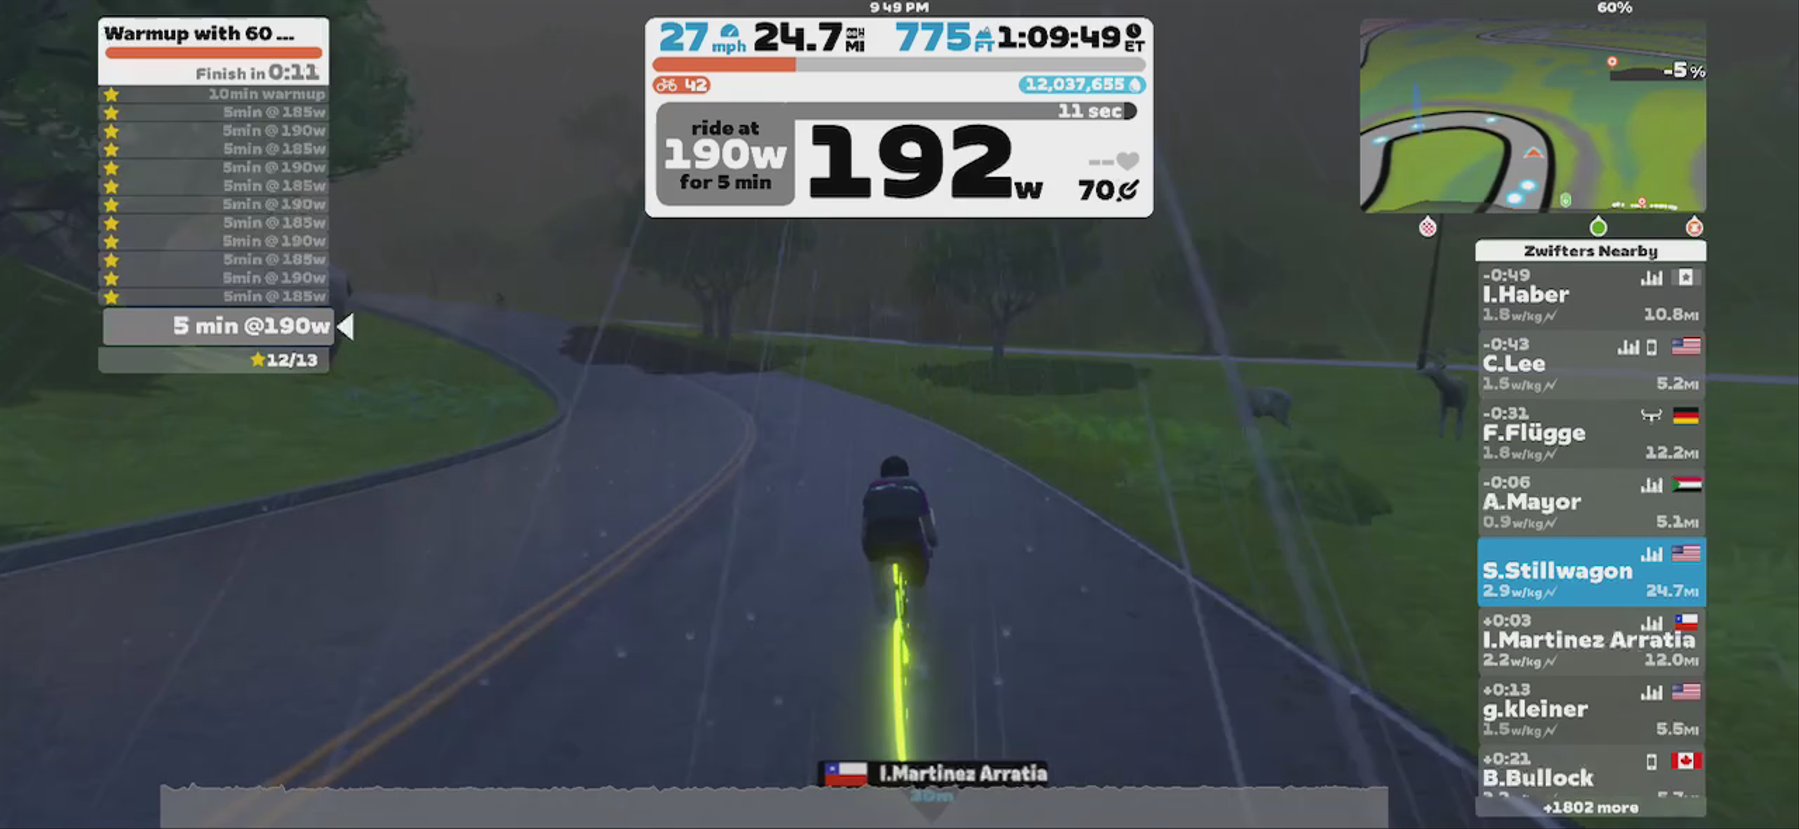 Zwift - Warmup with 60 min. of 80% in Watopia